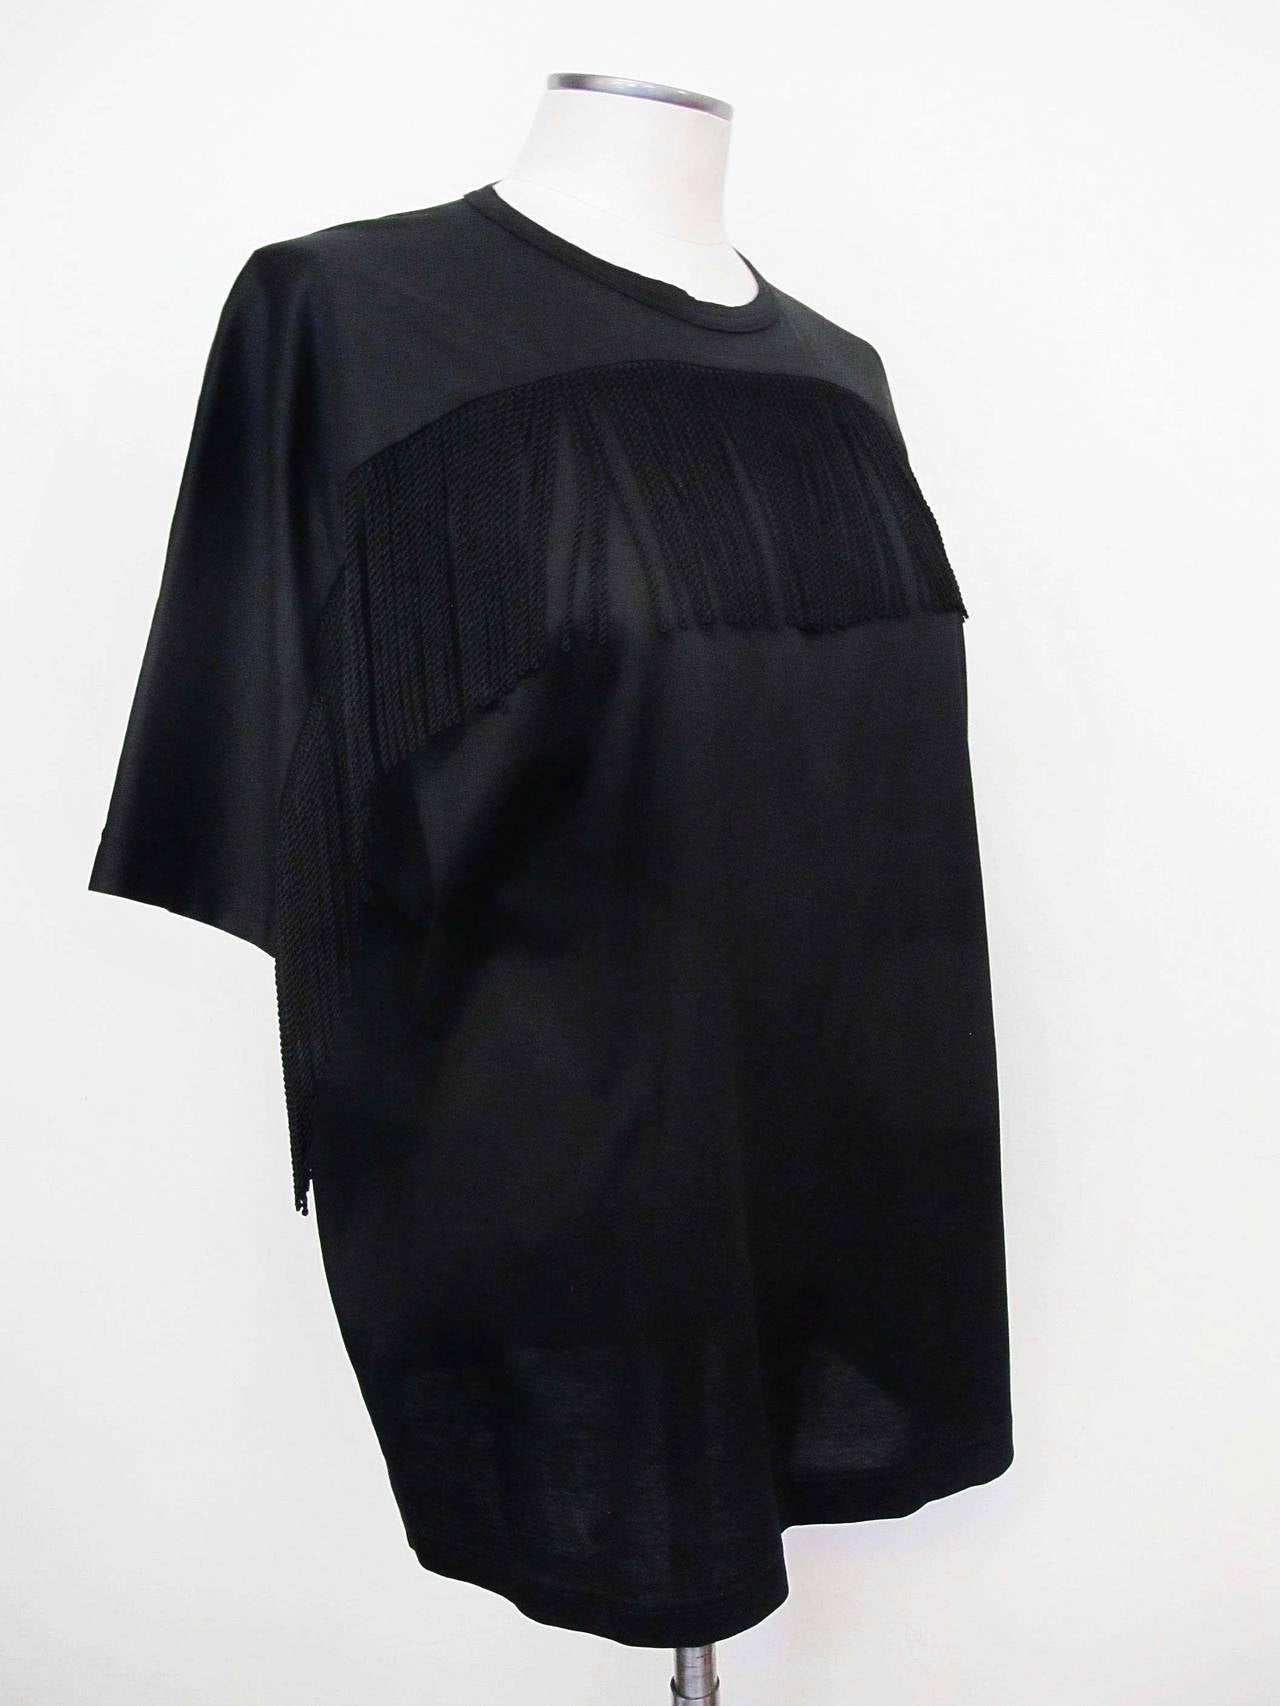 Junya Watanabe combination black T-Shirt and Blouse with continuous short sleeve. A 4.5 inch fringe captures the front of the blouse. Shoulder to shoulder measures 30 inches.